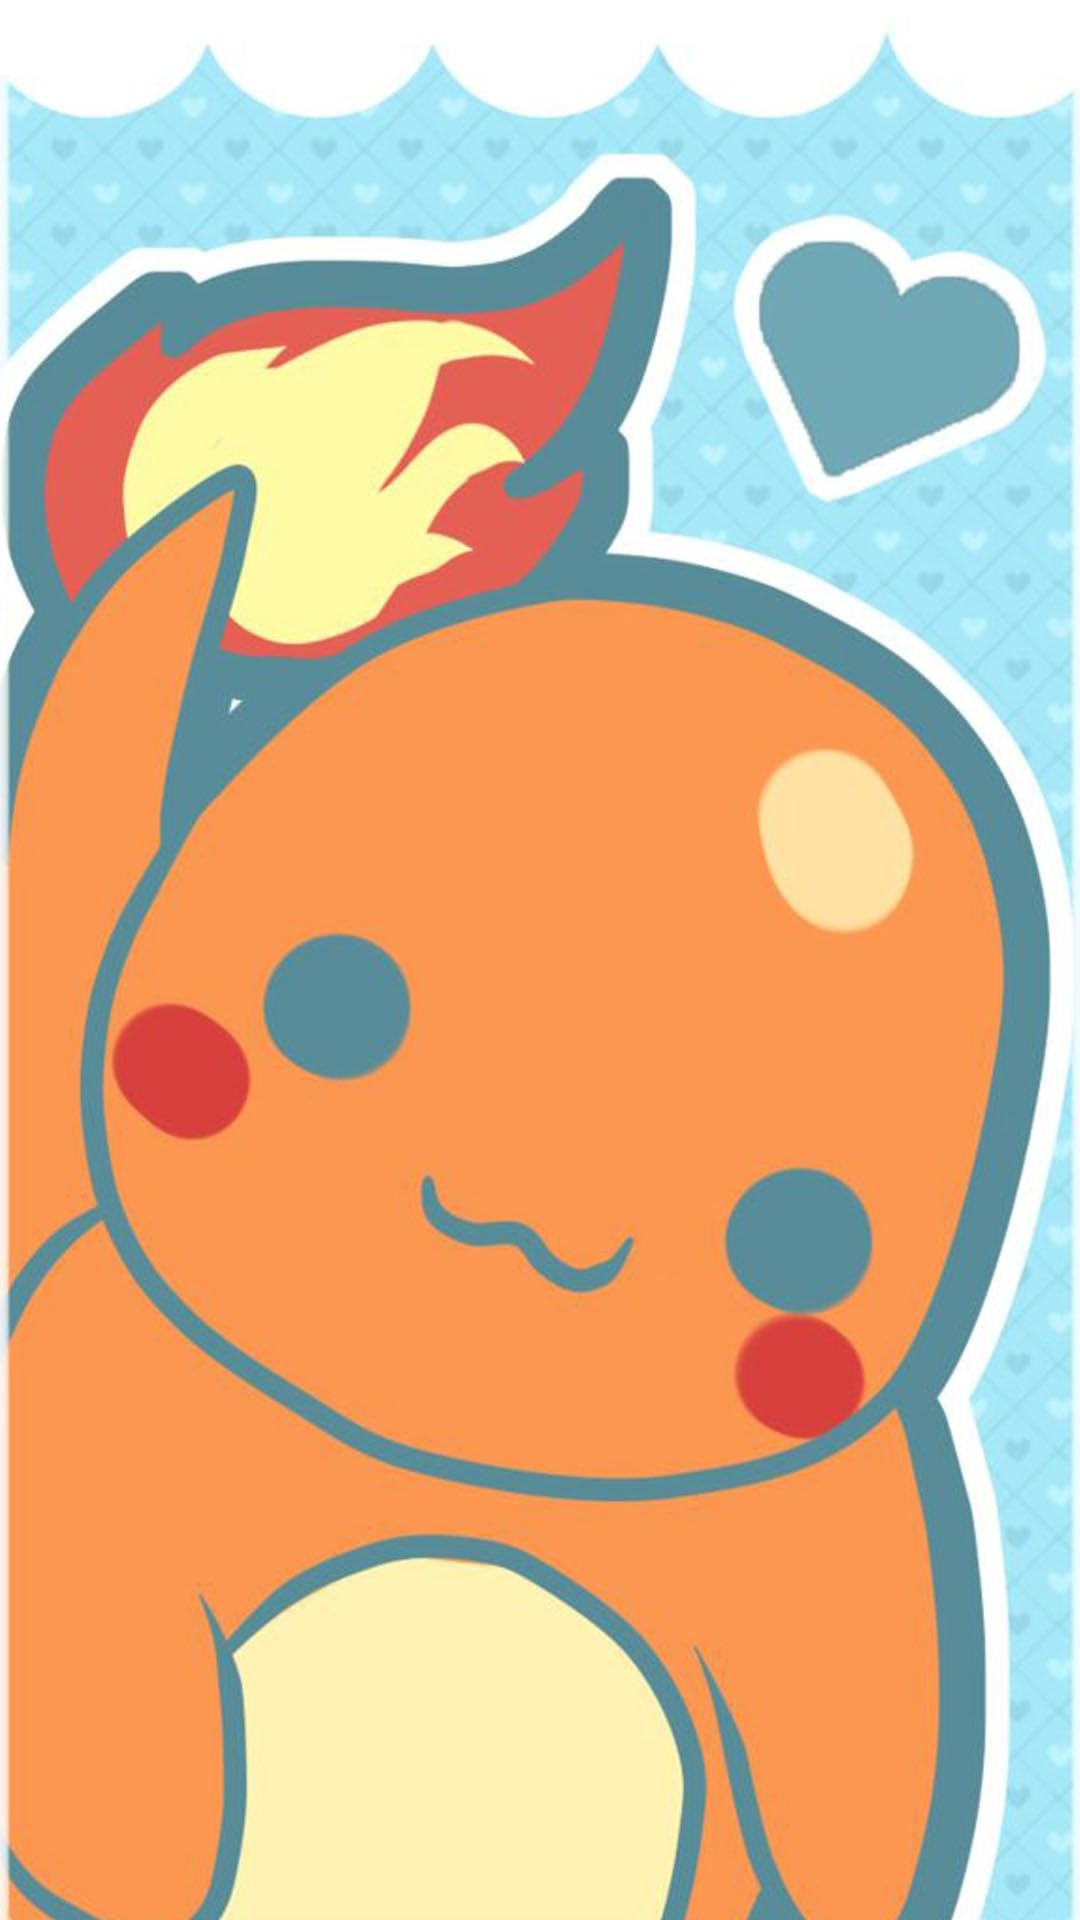 This Charmander wallpaper is so cute, its easy to forget that hes a fire breathing dragon